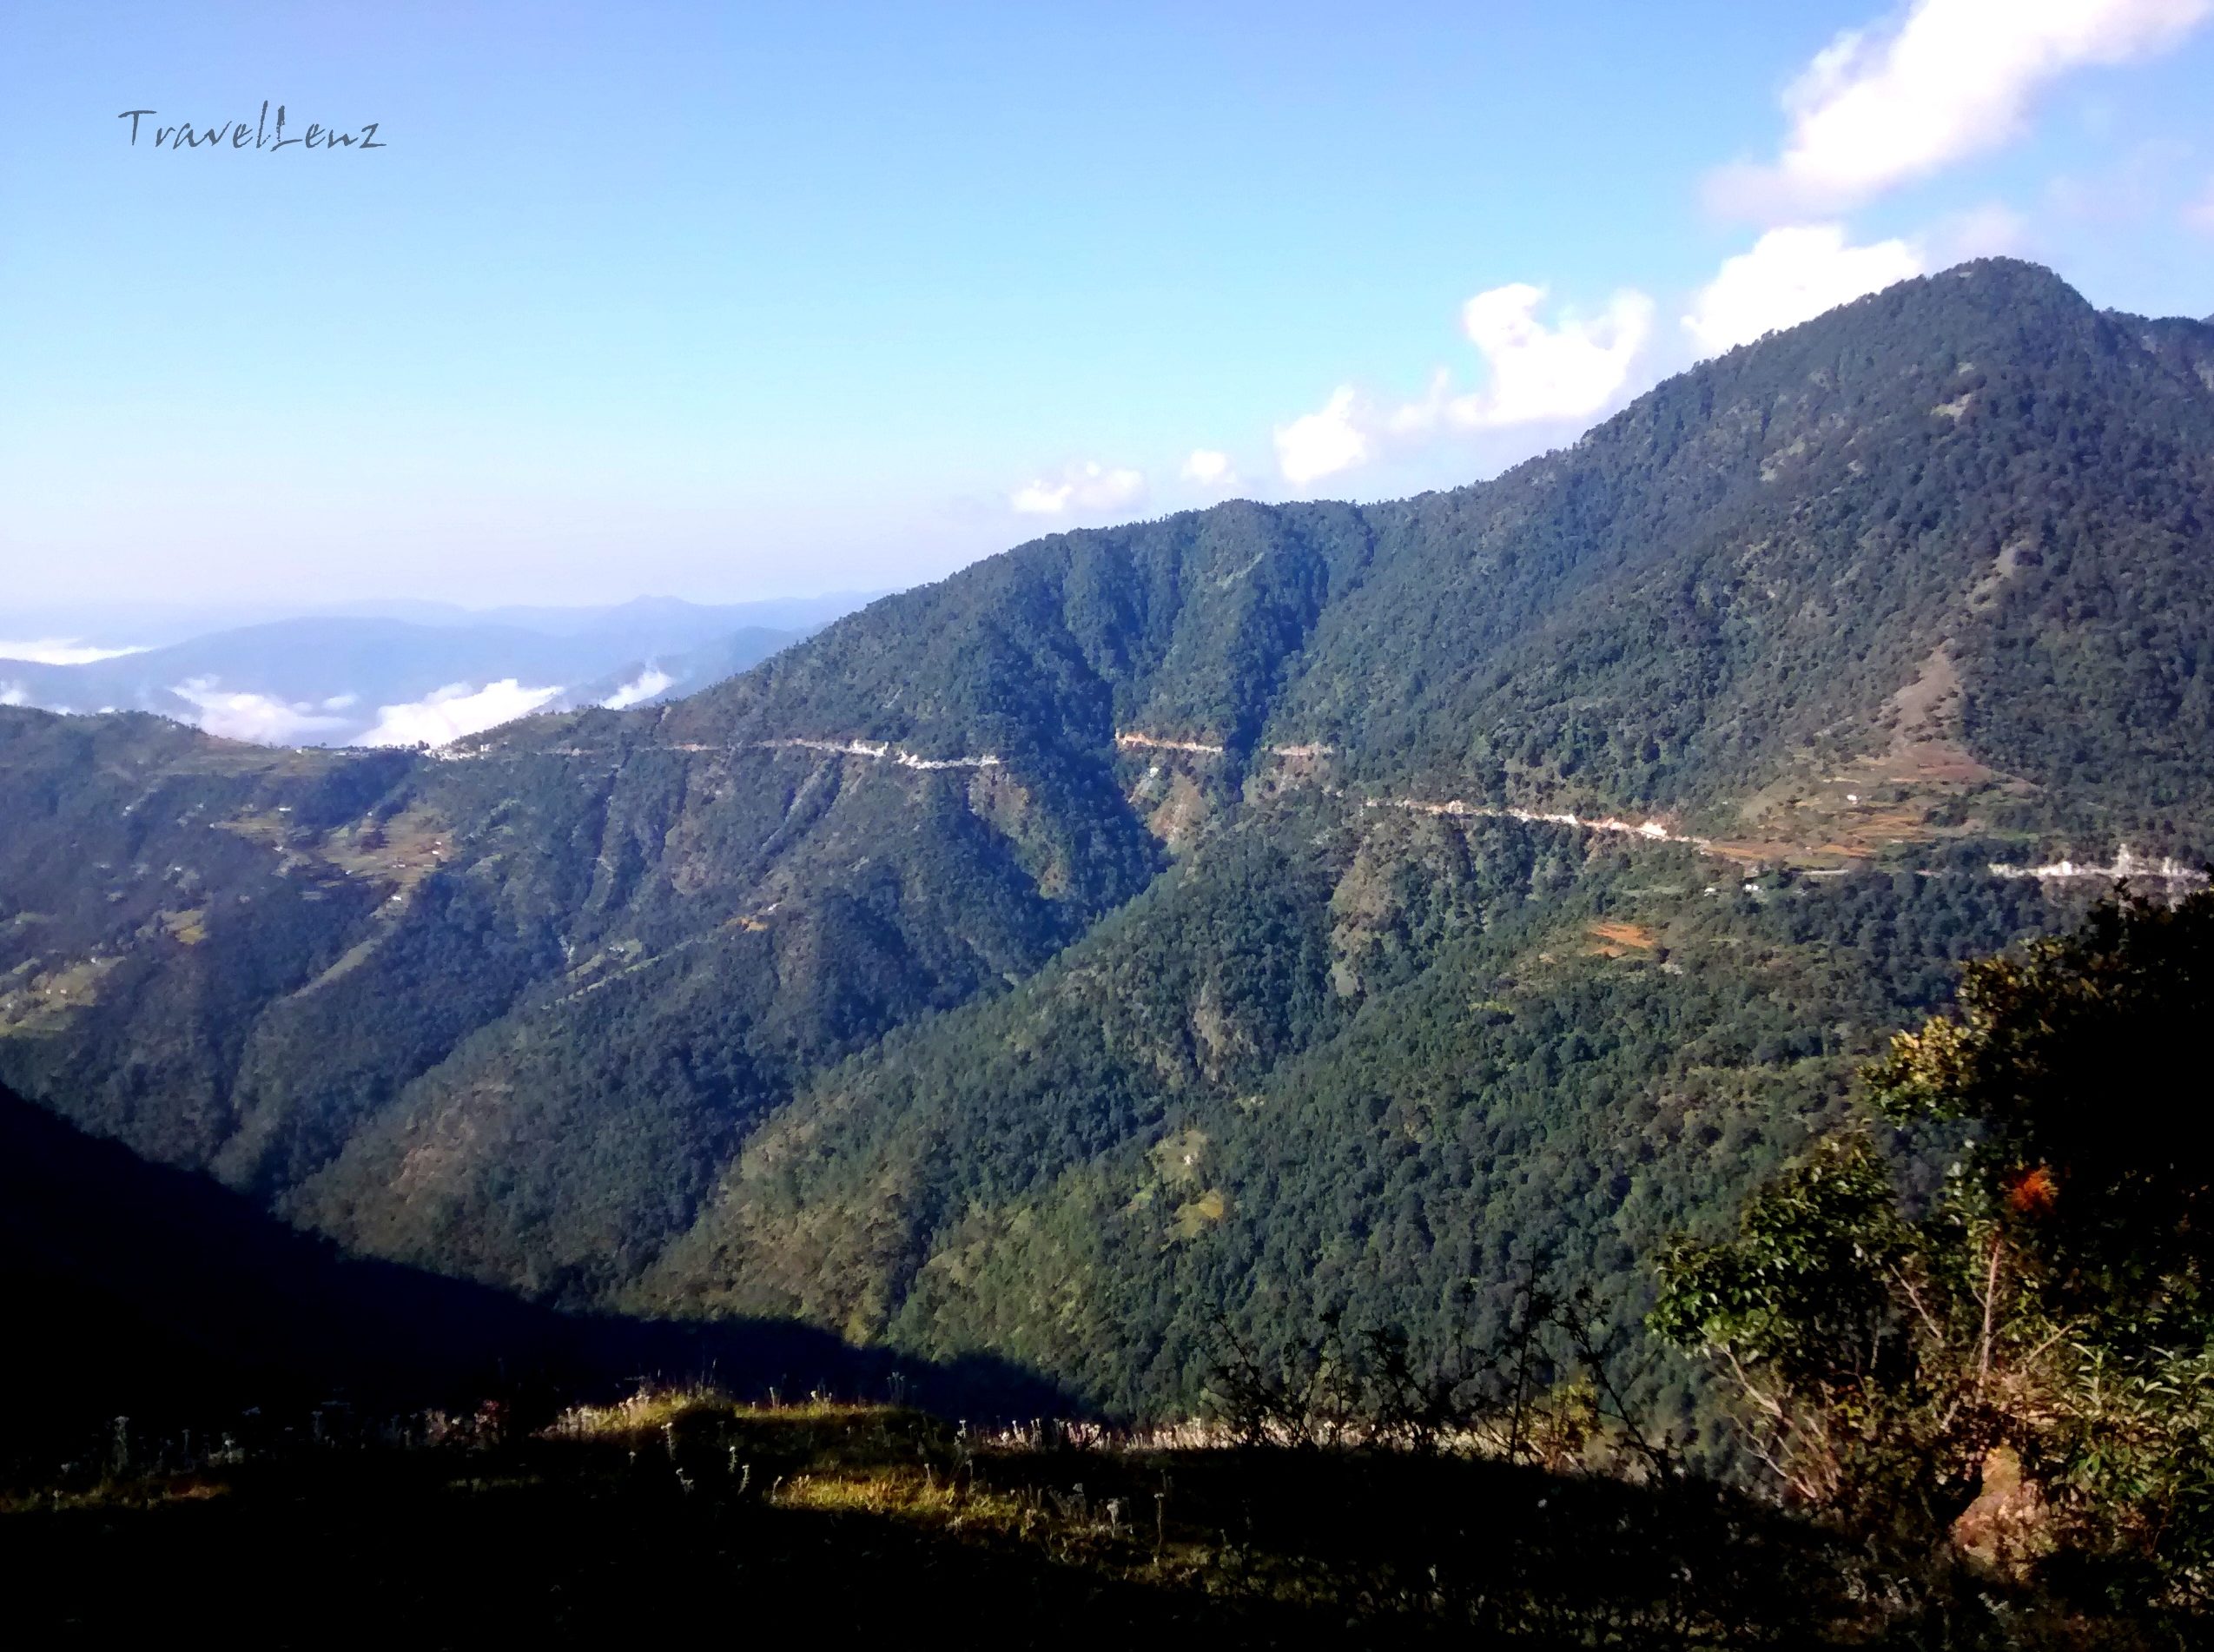 A mountain road seen from a distance on the way from Didna to Ali Bugyal